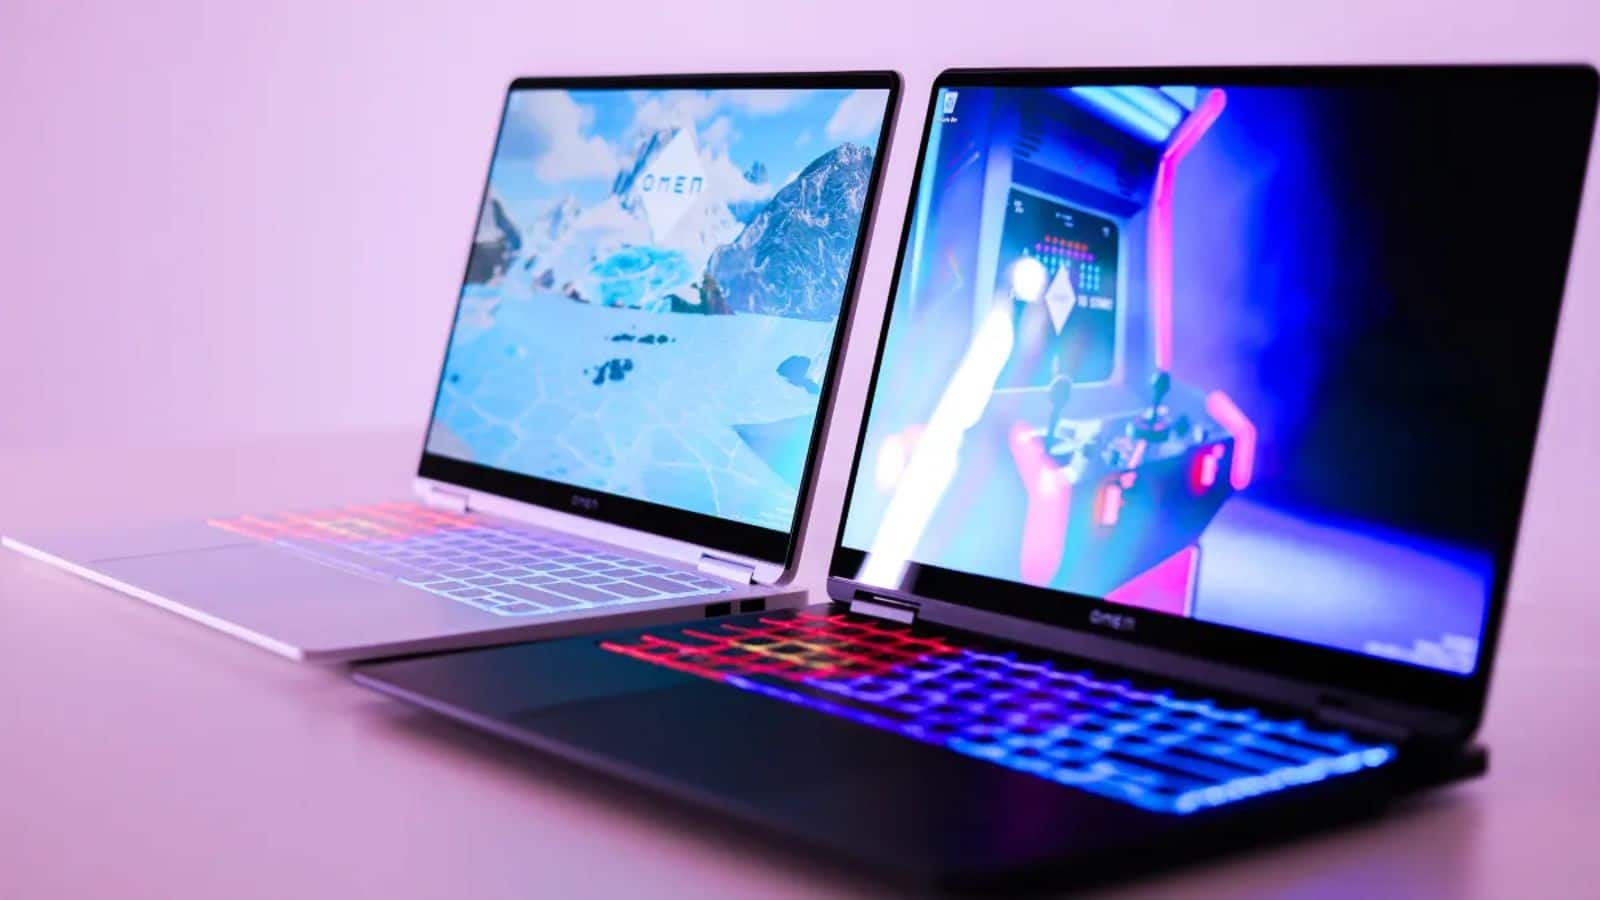 HP's latest gaming laptop offers flagship hardware, several AI chops